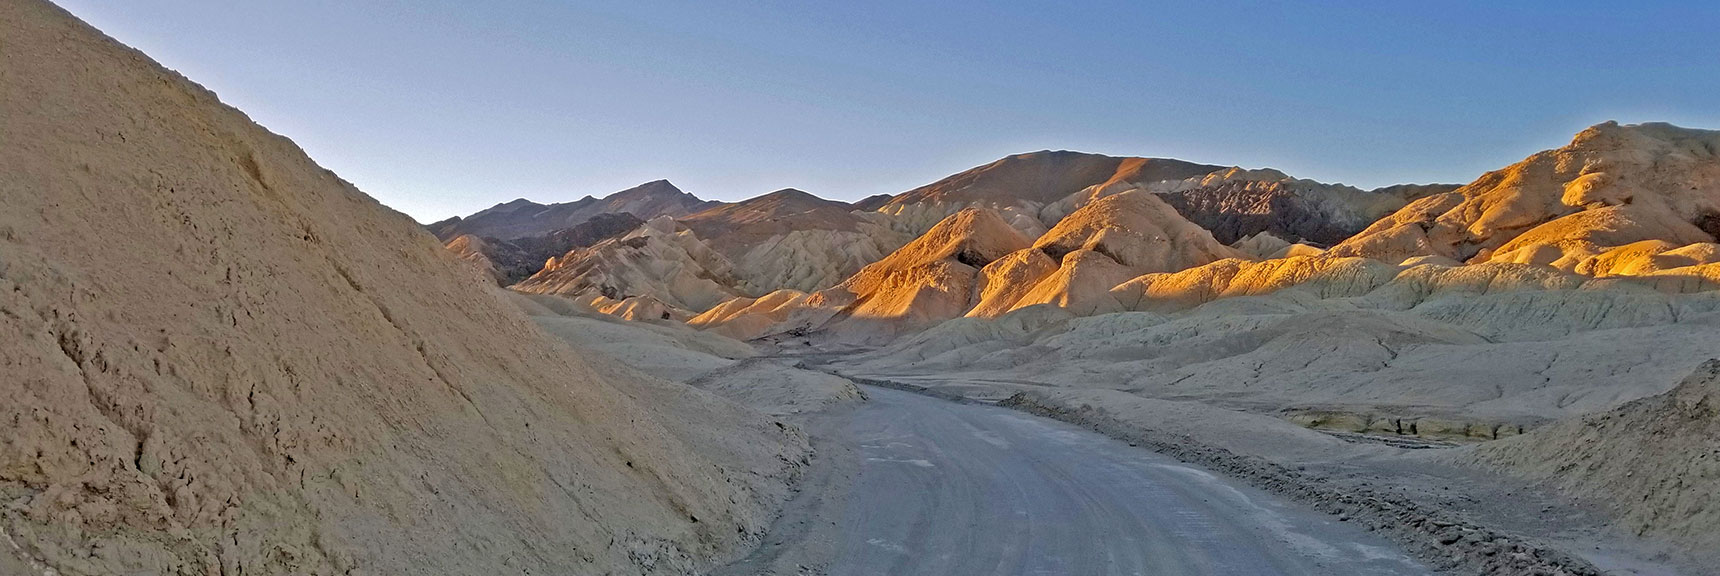 View Southeast Up Canyon Toward the Rising Sun | Twenty Mule Team Canyon | Death Valley National Park, California